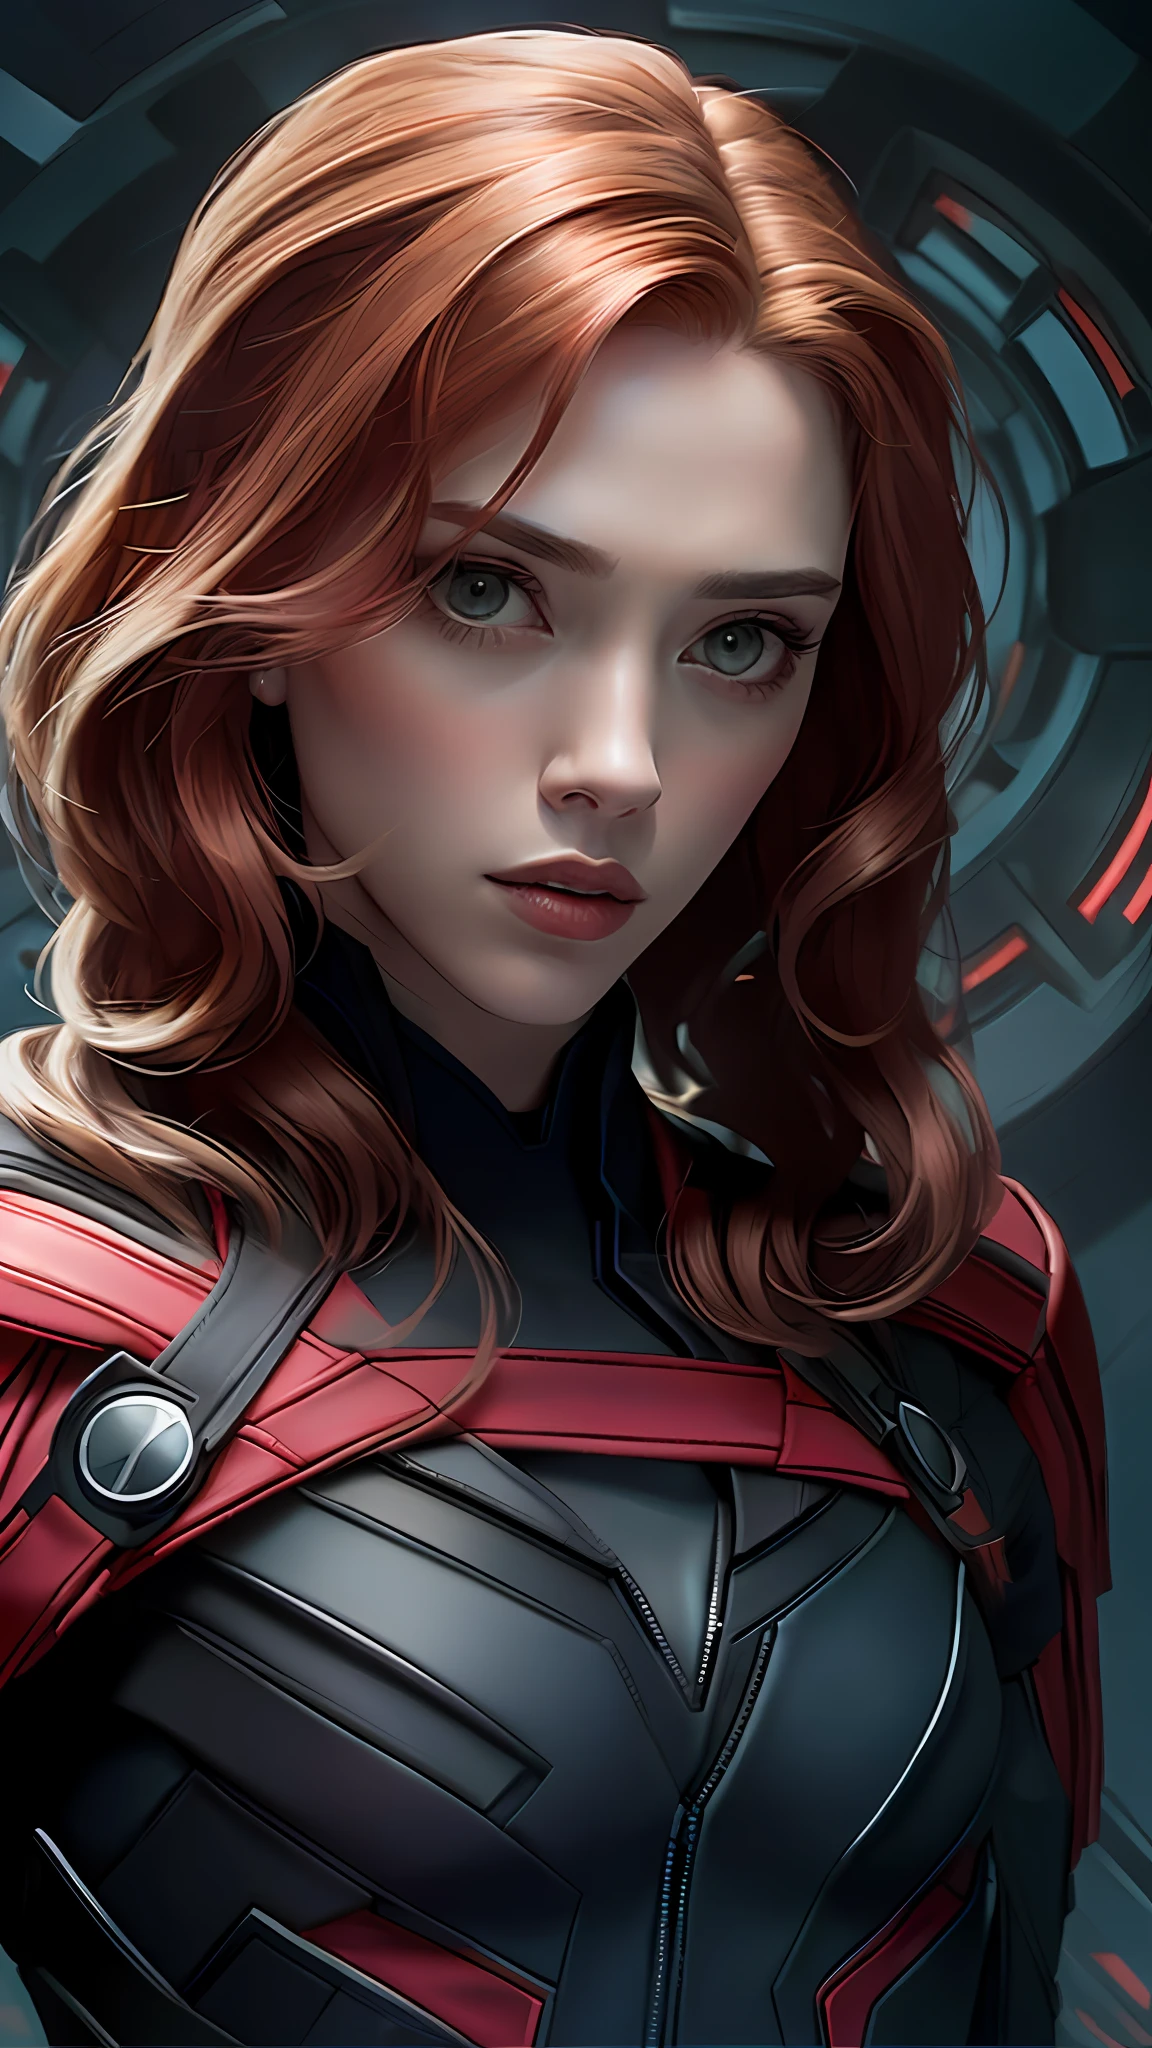 Scarlett playing, Black Widow, serious face, looking forward,